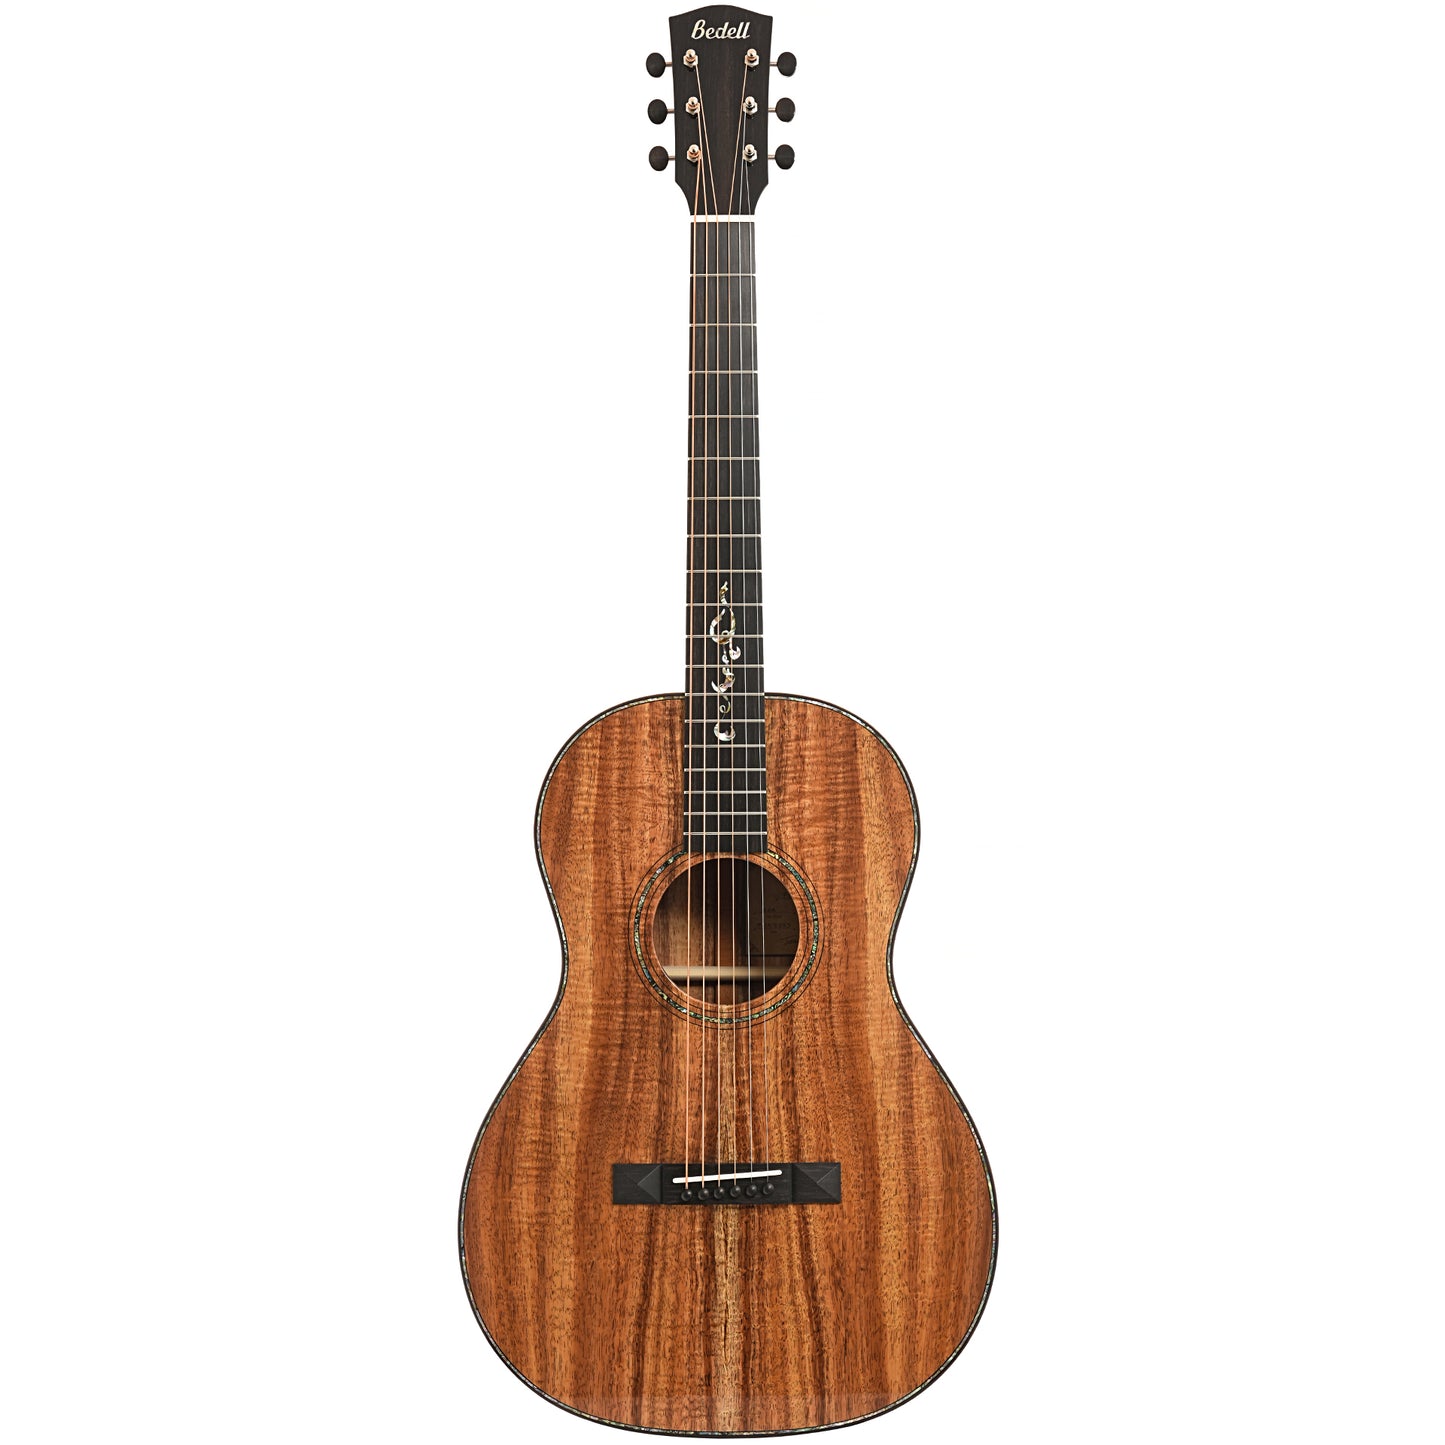 Full front of Bedell Limited Edition Fireside Parlor Koa